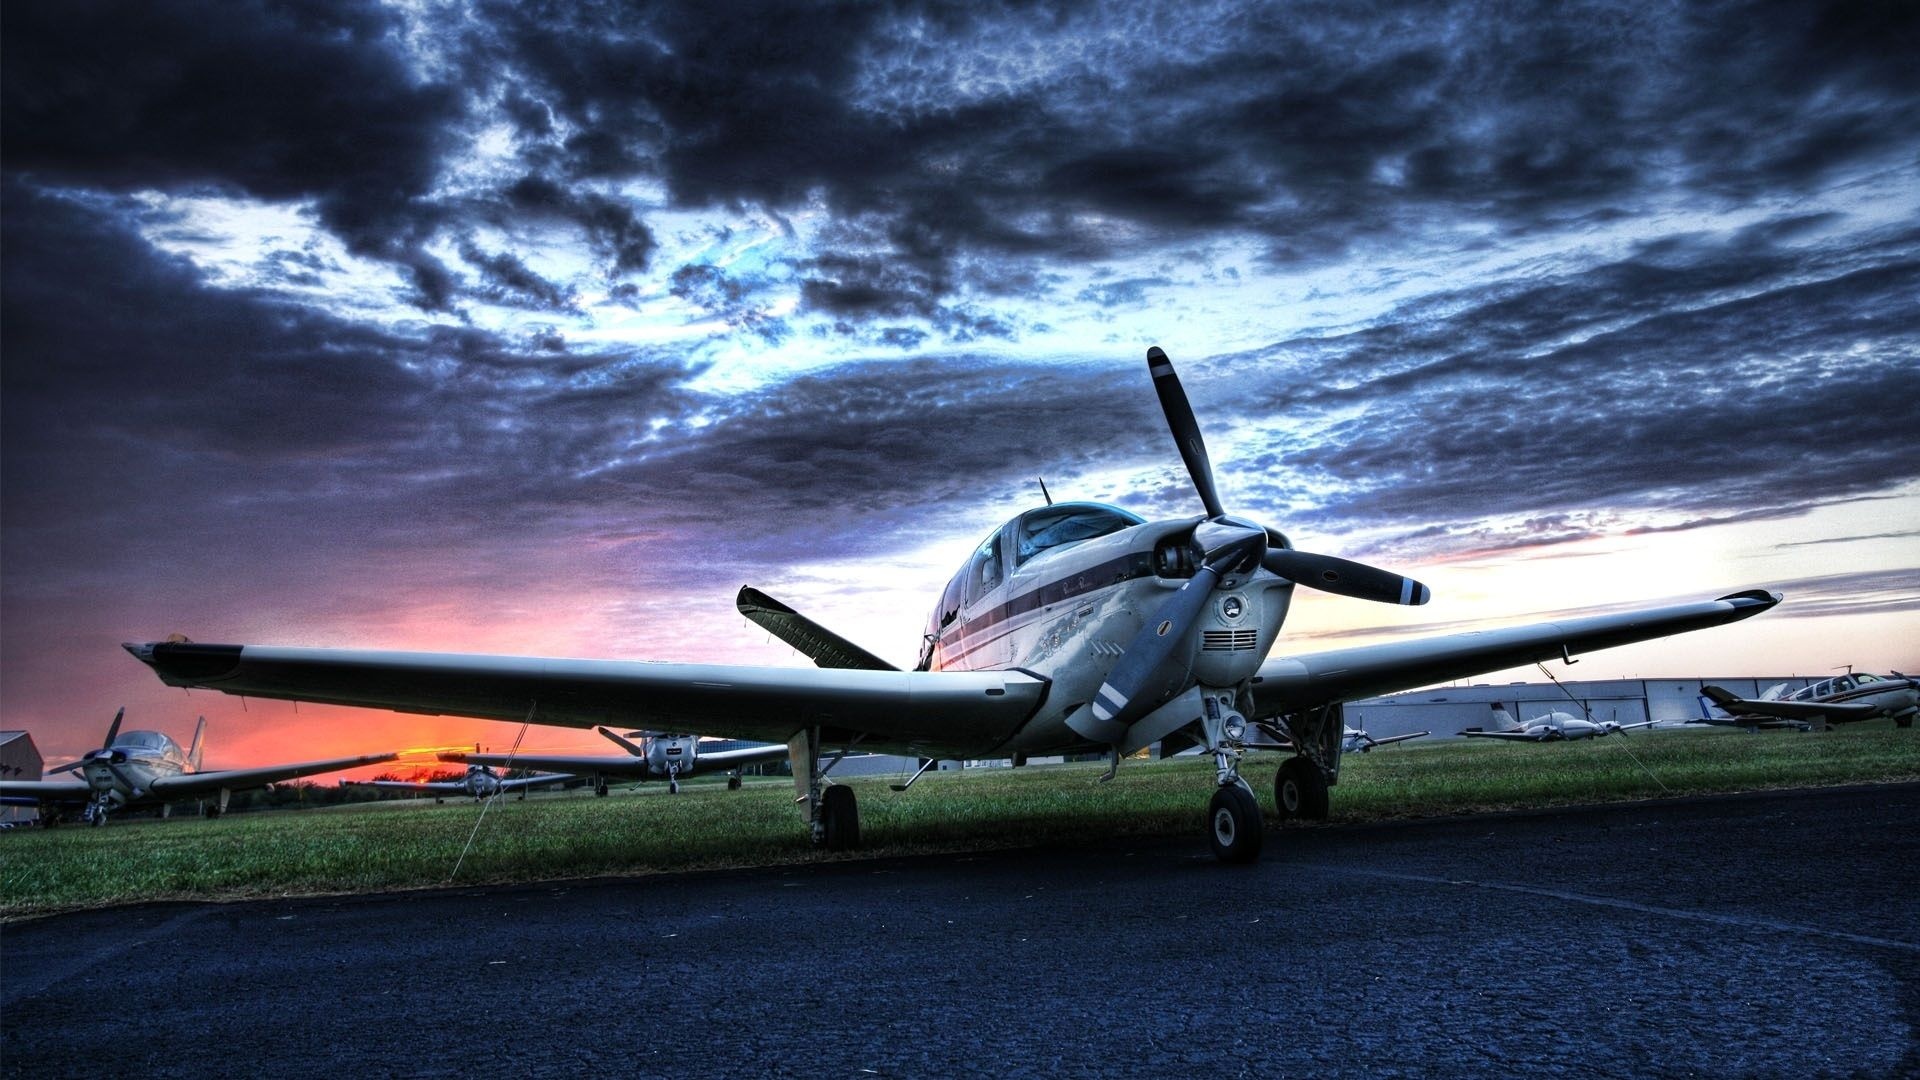 General aviation, HD wallpapers, Private aircraft, Flying enthusiasts, 1920x1080 Full HD Desktop